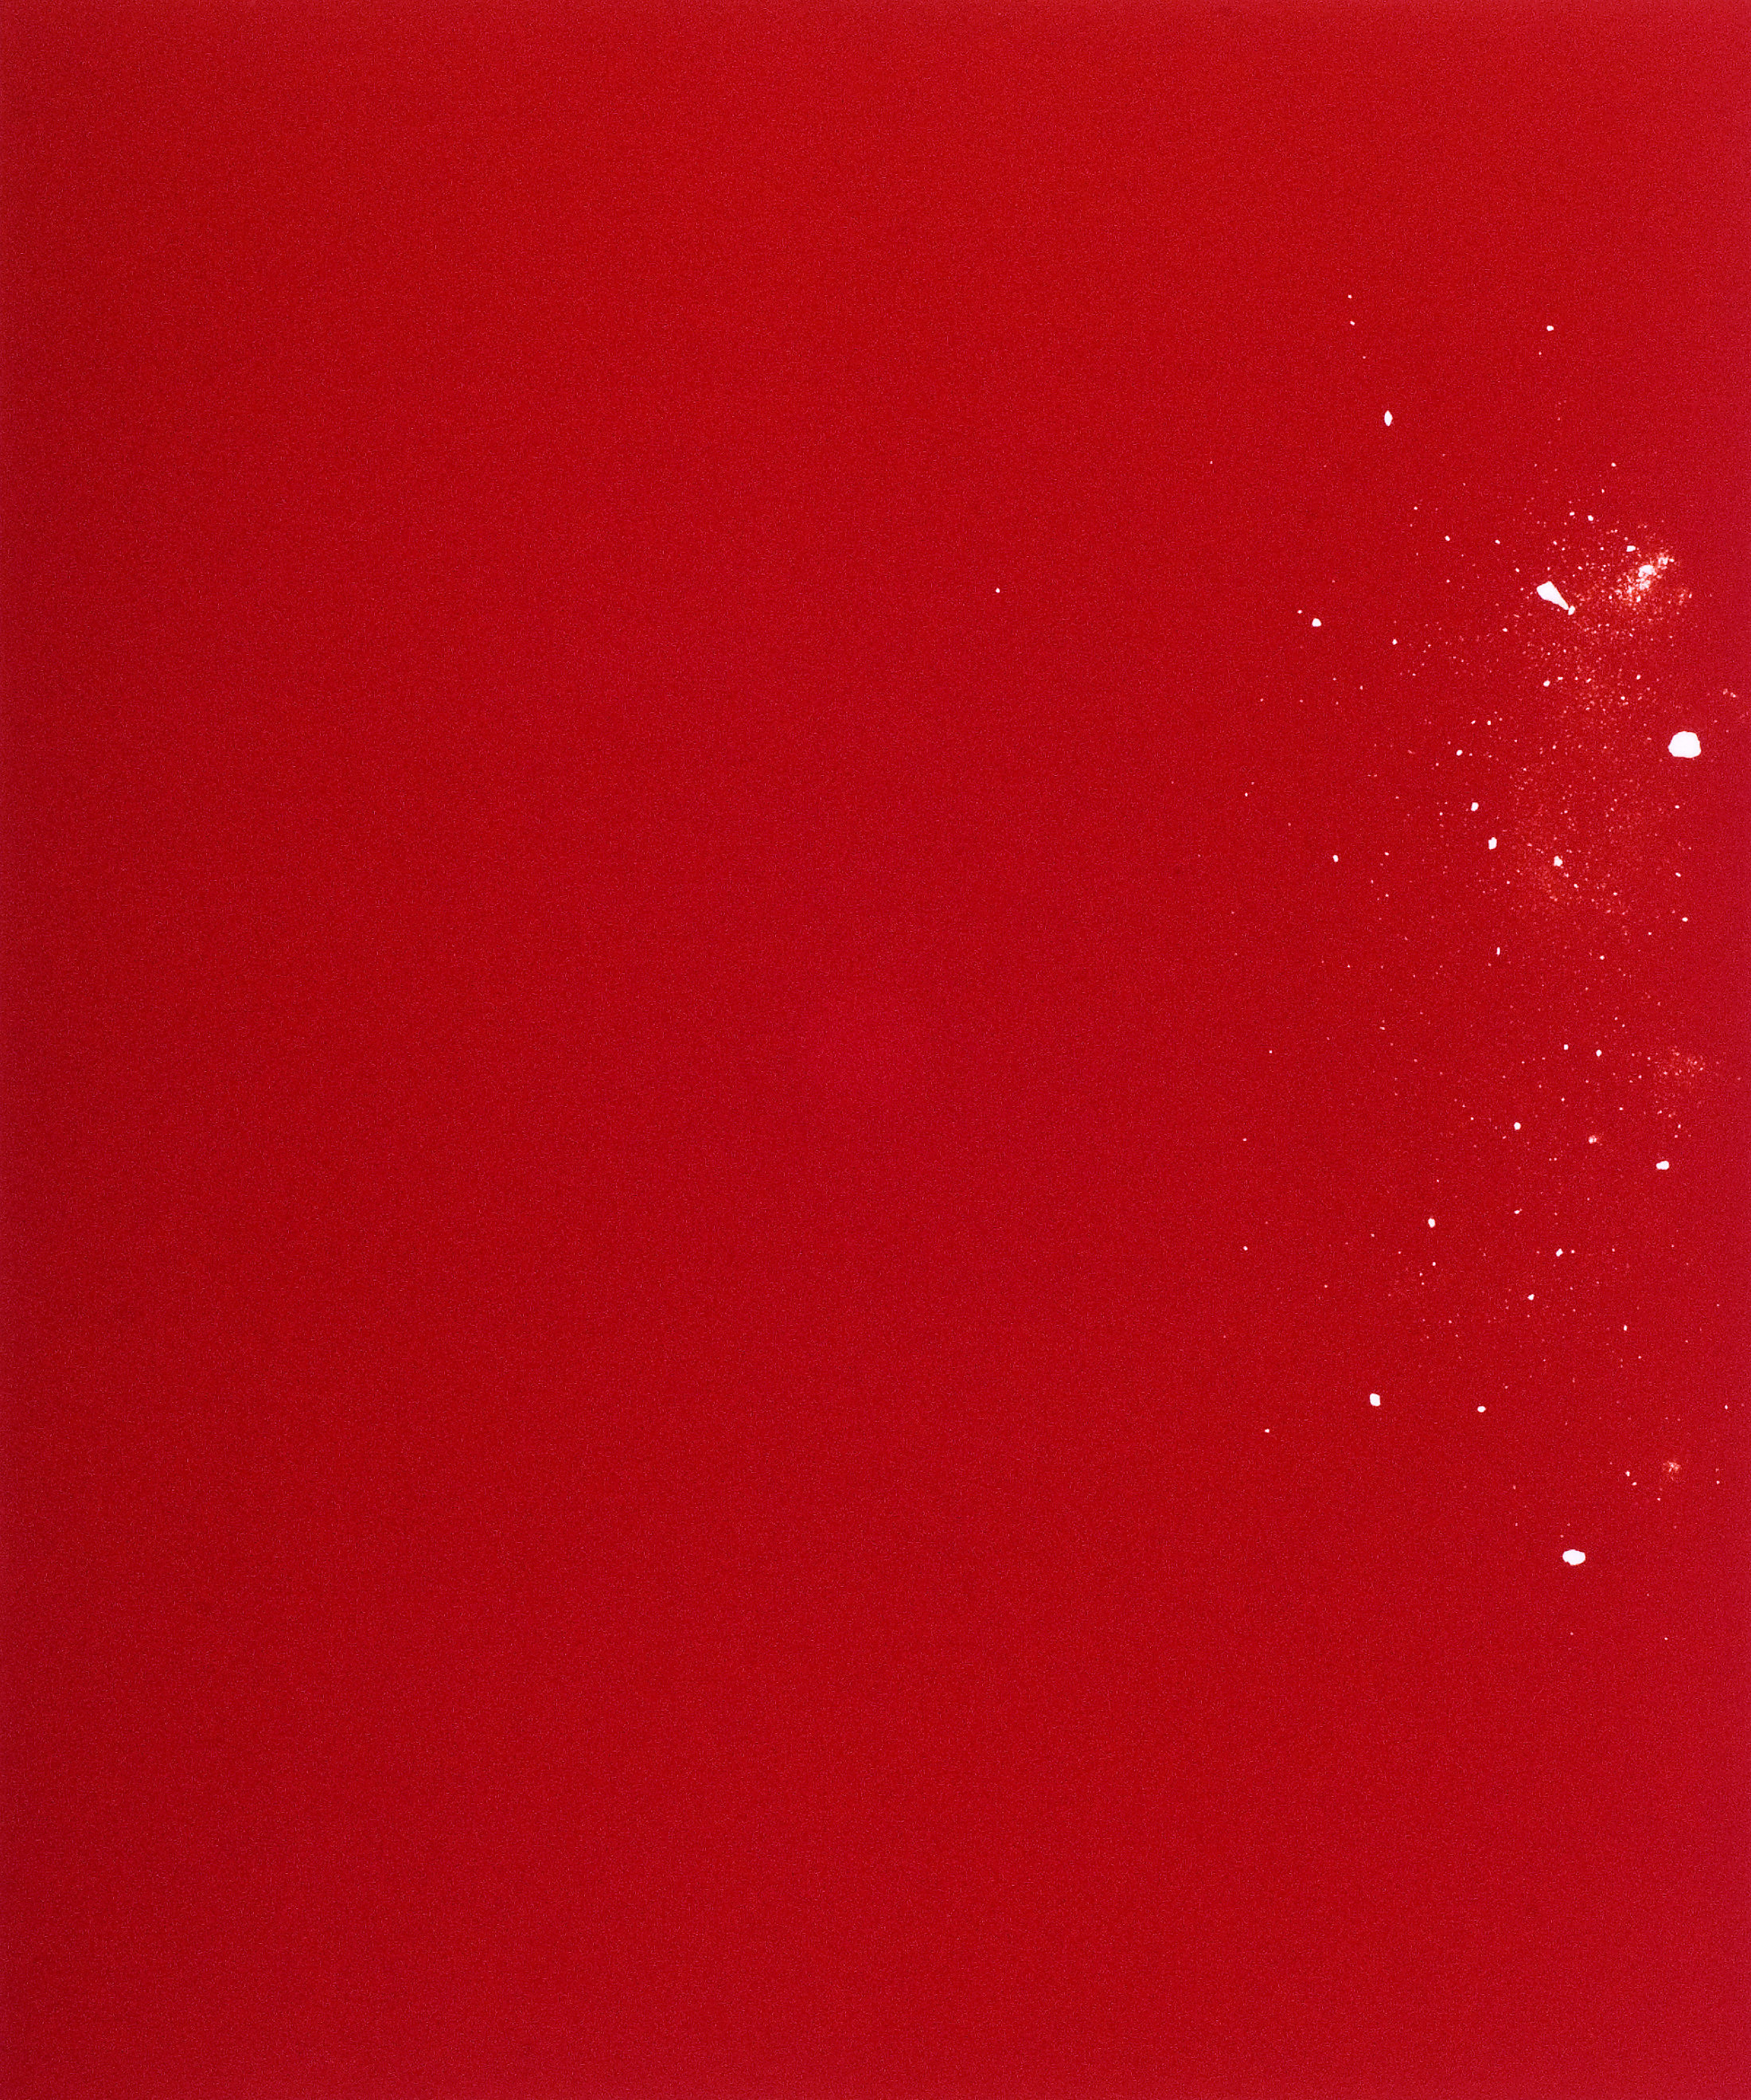 Study #11, the year of Heinecken’s death, 2006 (20y, 06m, at F8 for 1 sec)
C-print, 20×24″
2010
